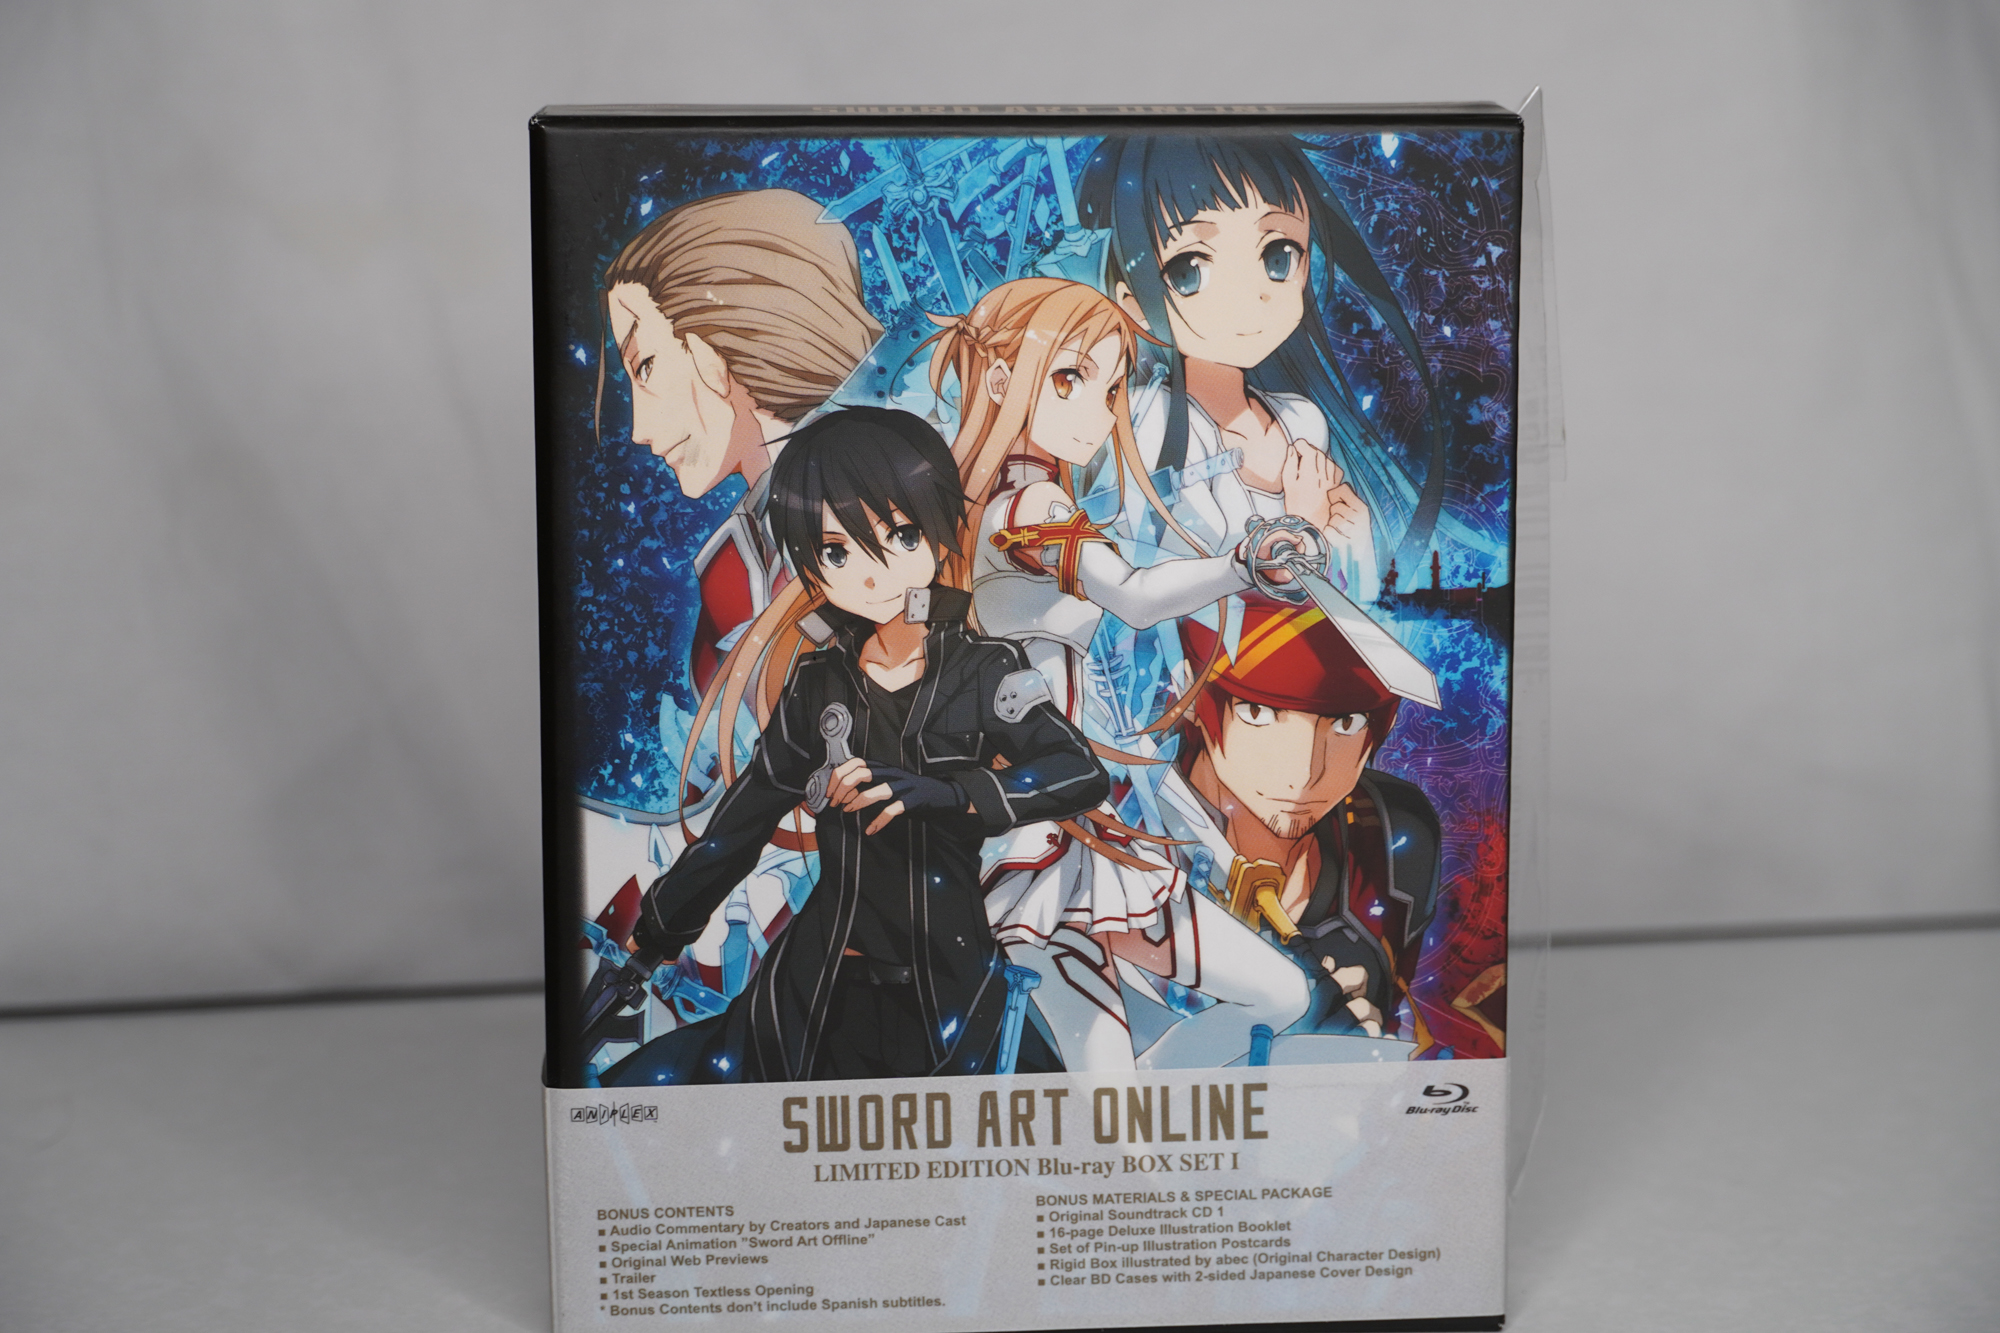 Sword Art Online Limited Edition Box Set 1 Unboxing | hXcHector.com